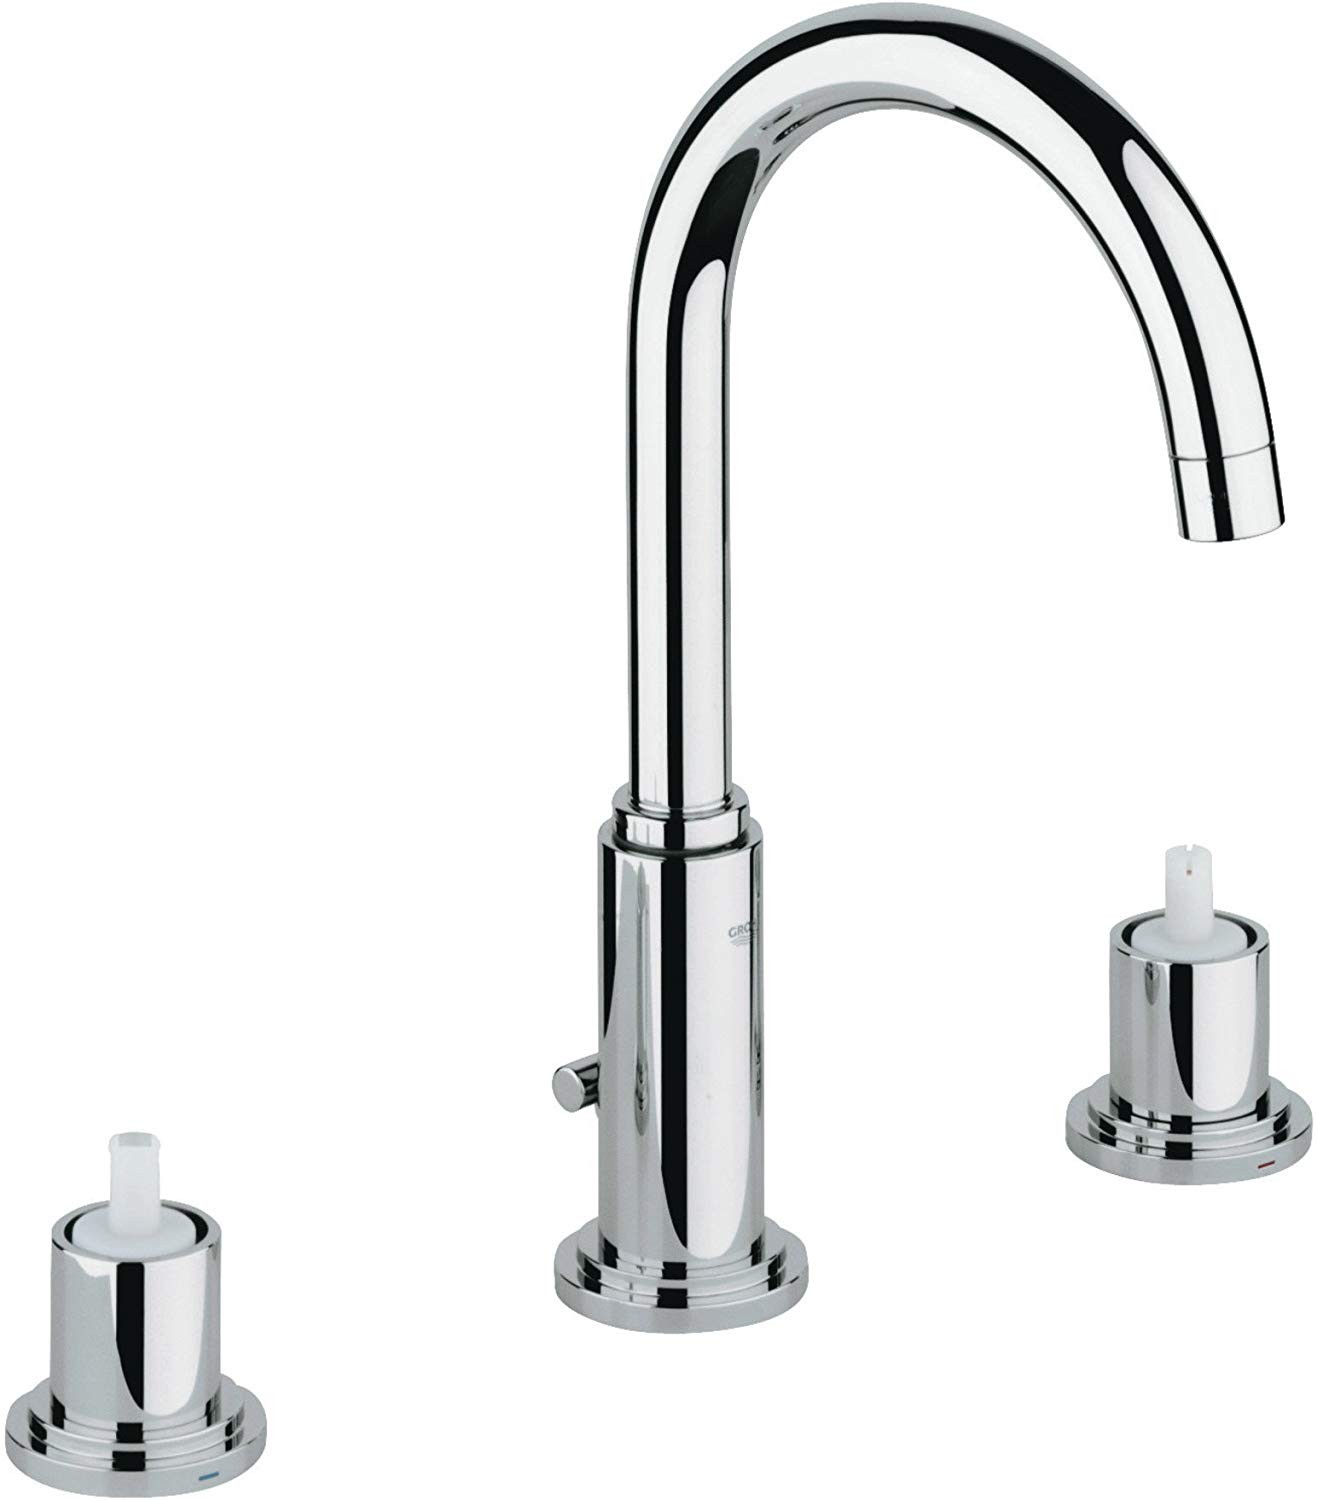 Grohe Faucets Parts Diagram Grohe atrio 8" 2 Handle High Spout Bathroom Faucet Of Grohe Faucets Parts Diagram